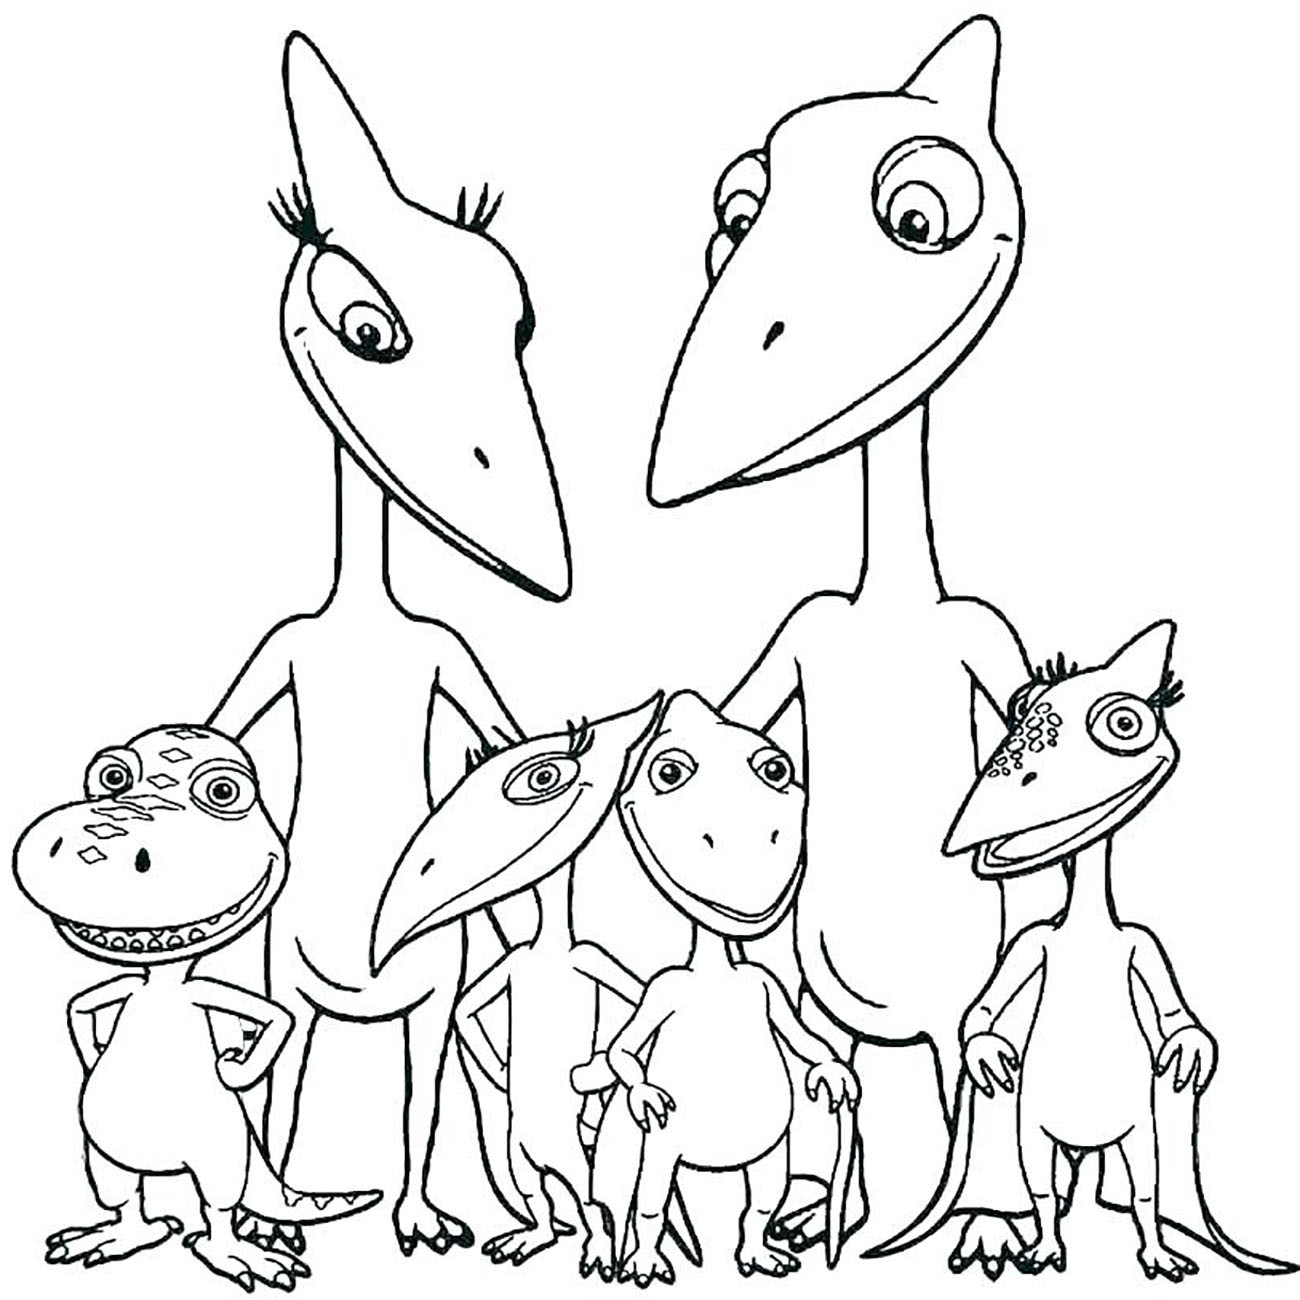 Coloring Pages For Kids Dinosaur
 Dinosaurs free to color for kids Velociraptor